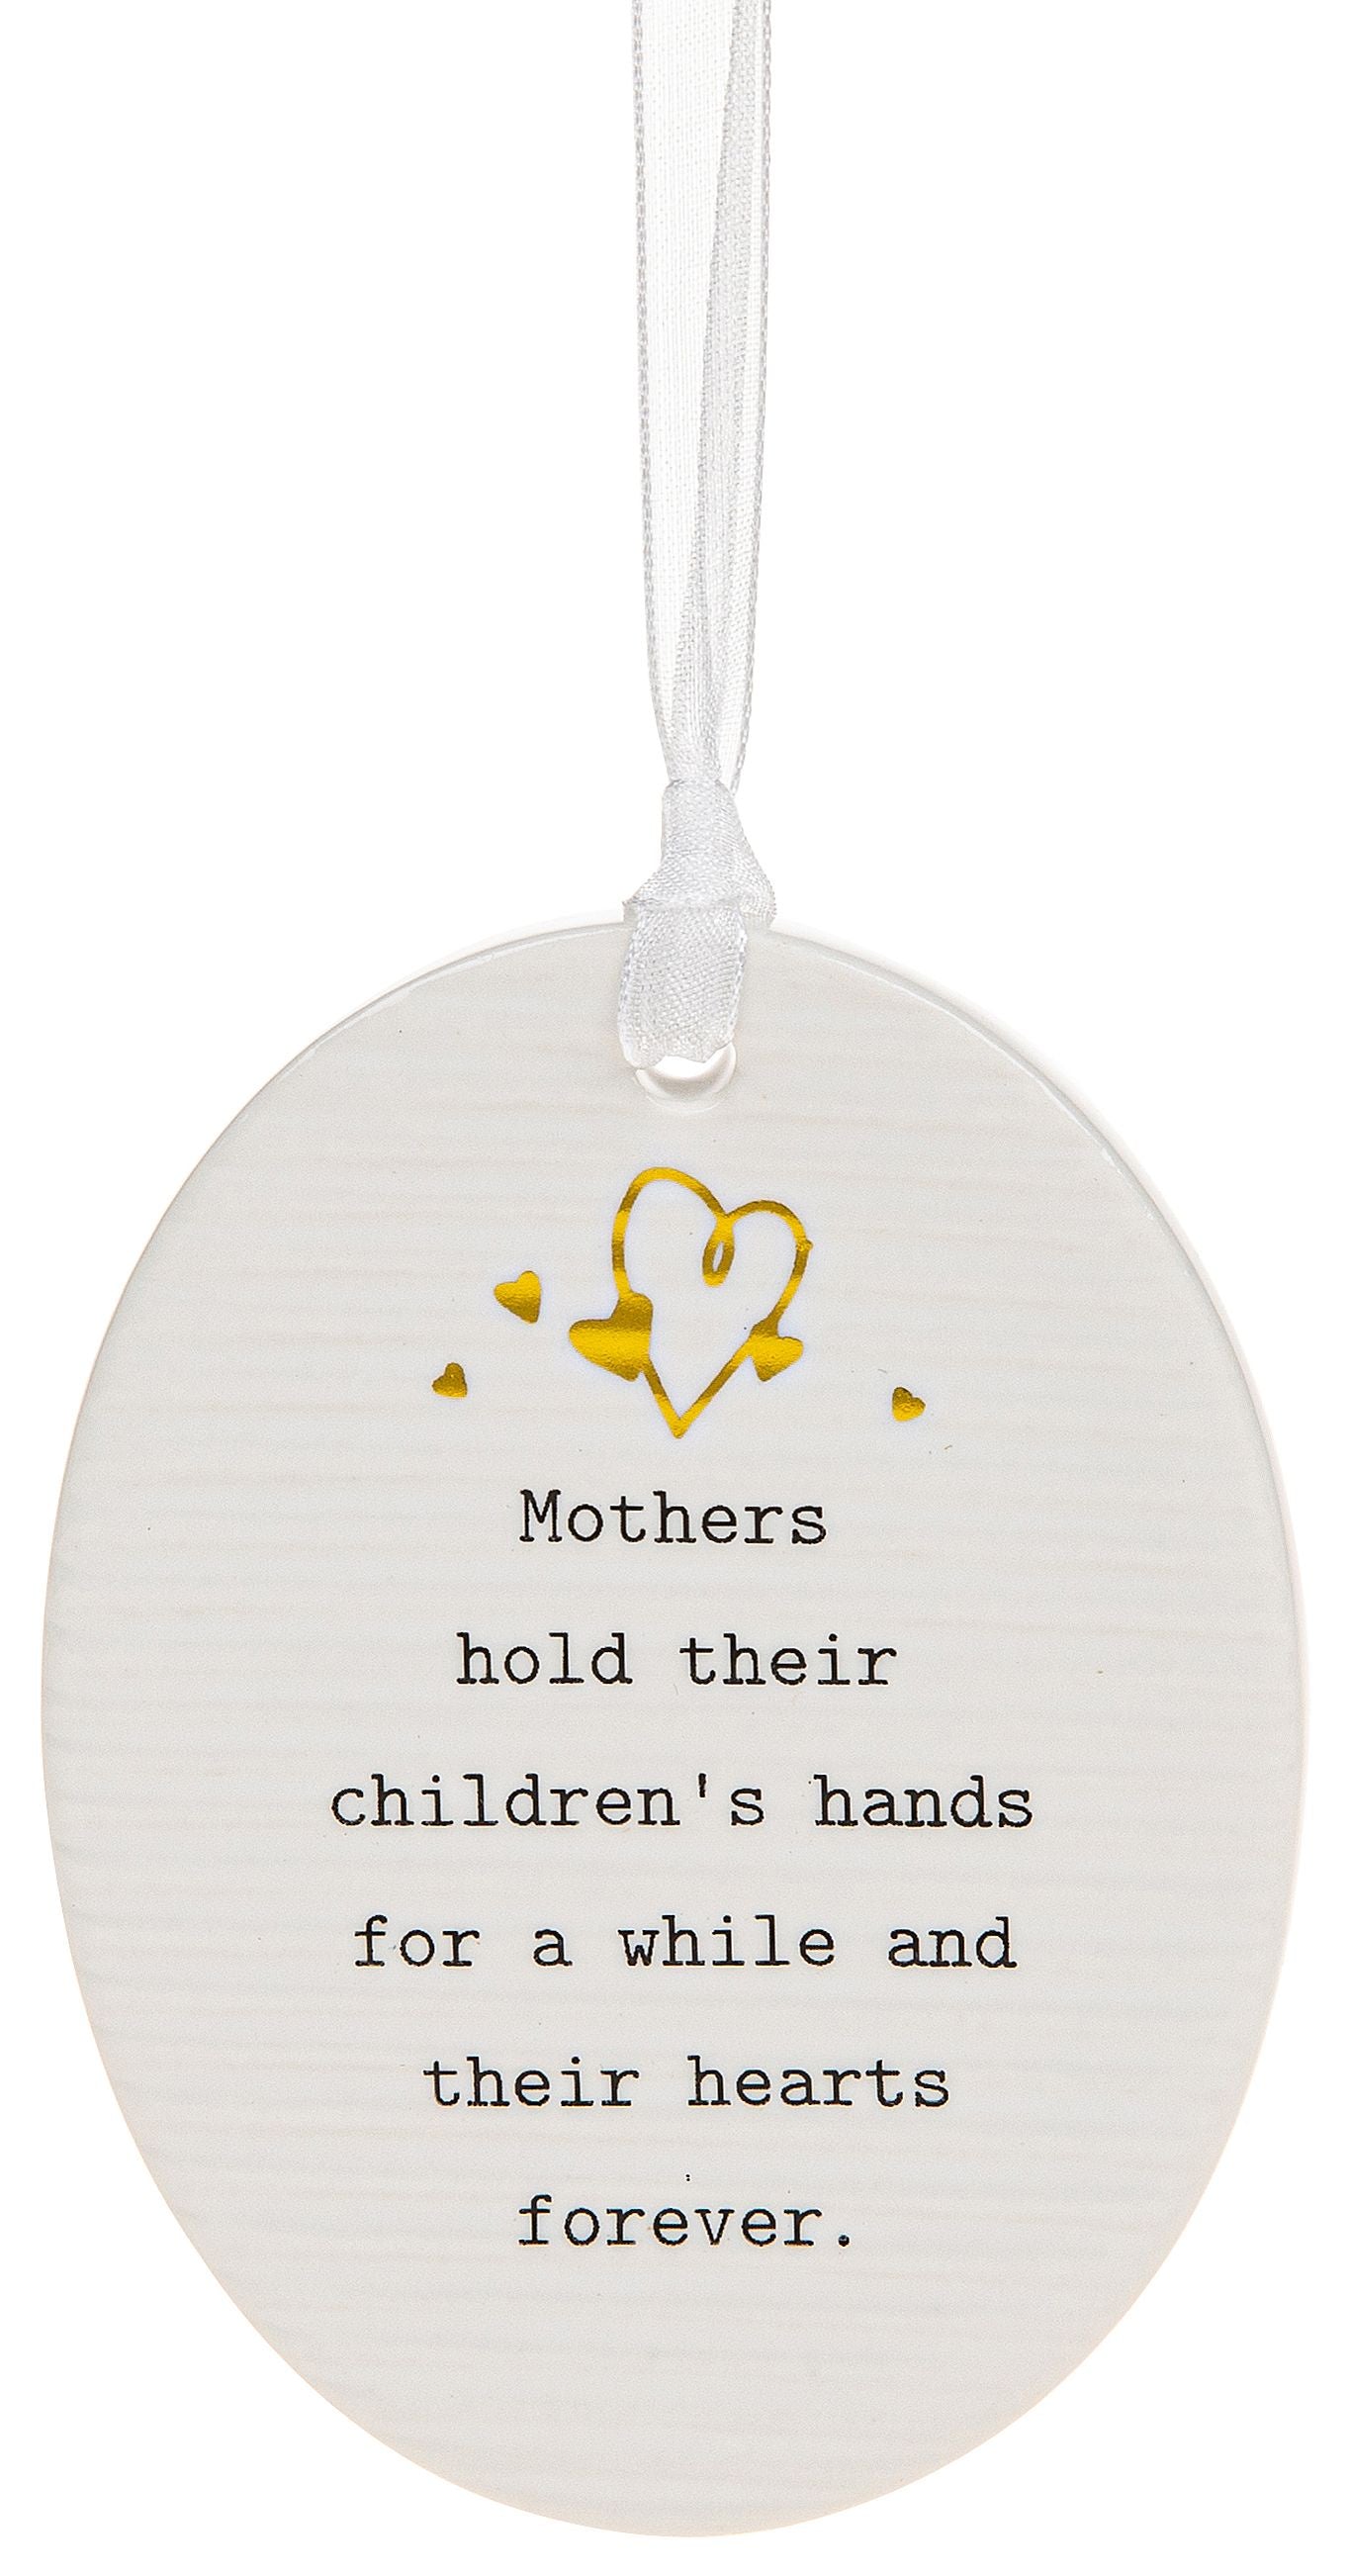 Ceramic Oval Plaque - Holding a Childs Hand